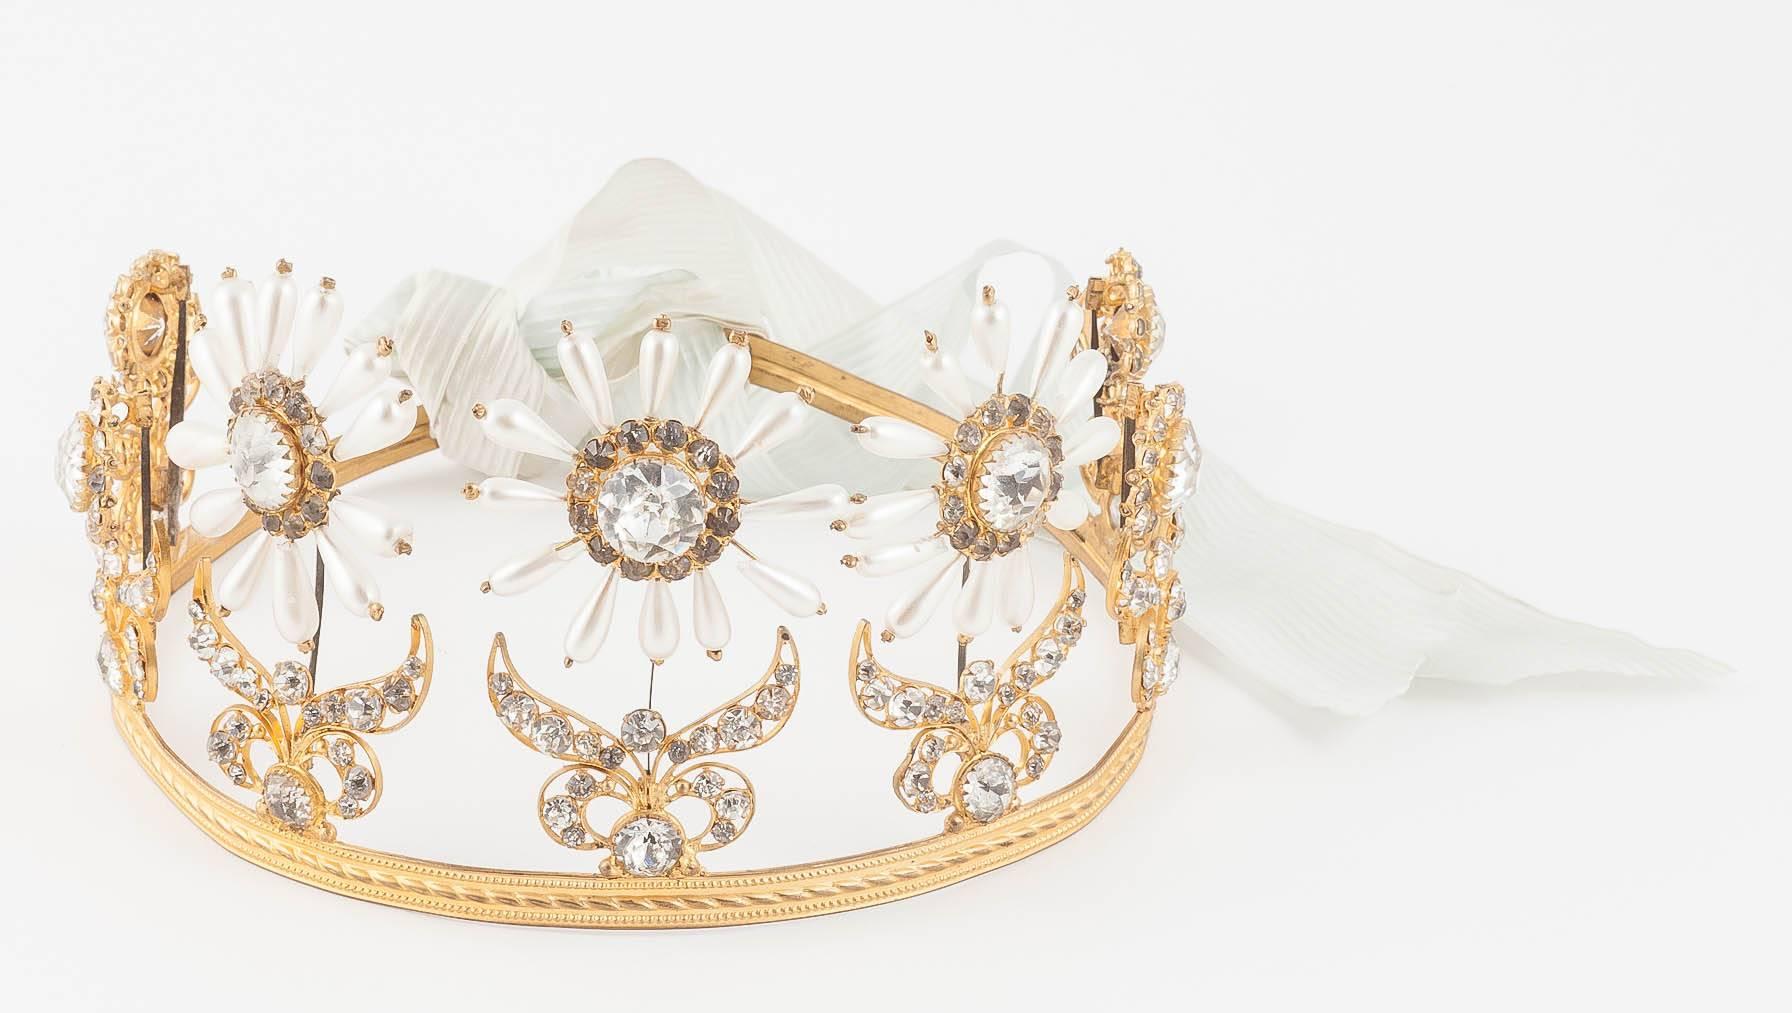 This is the best wedding headdress I have ever found! These beautiful pieces were passed down in families from one generation to the next. Not only are the large glass pearl daisies charming and joyous in their bold simplicity, but they are also 'en